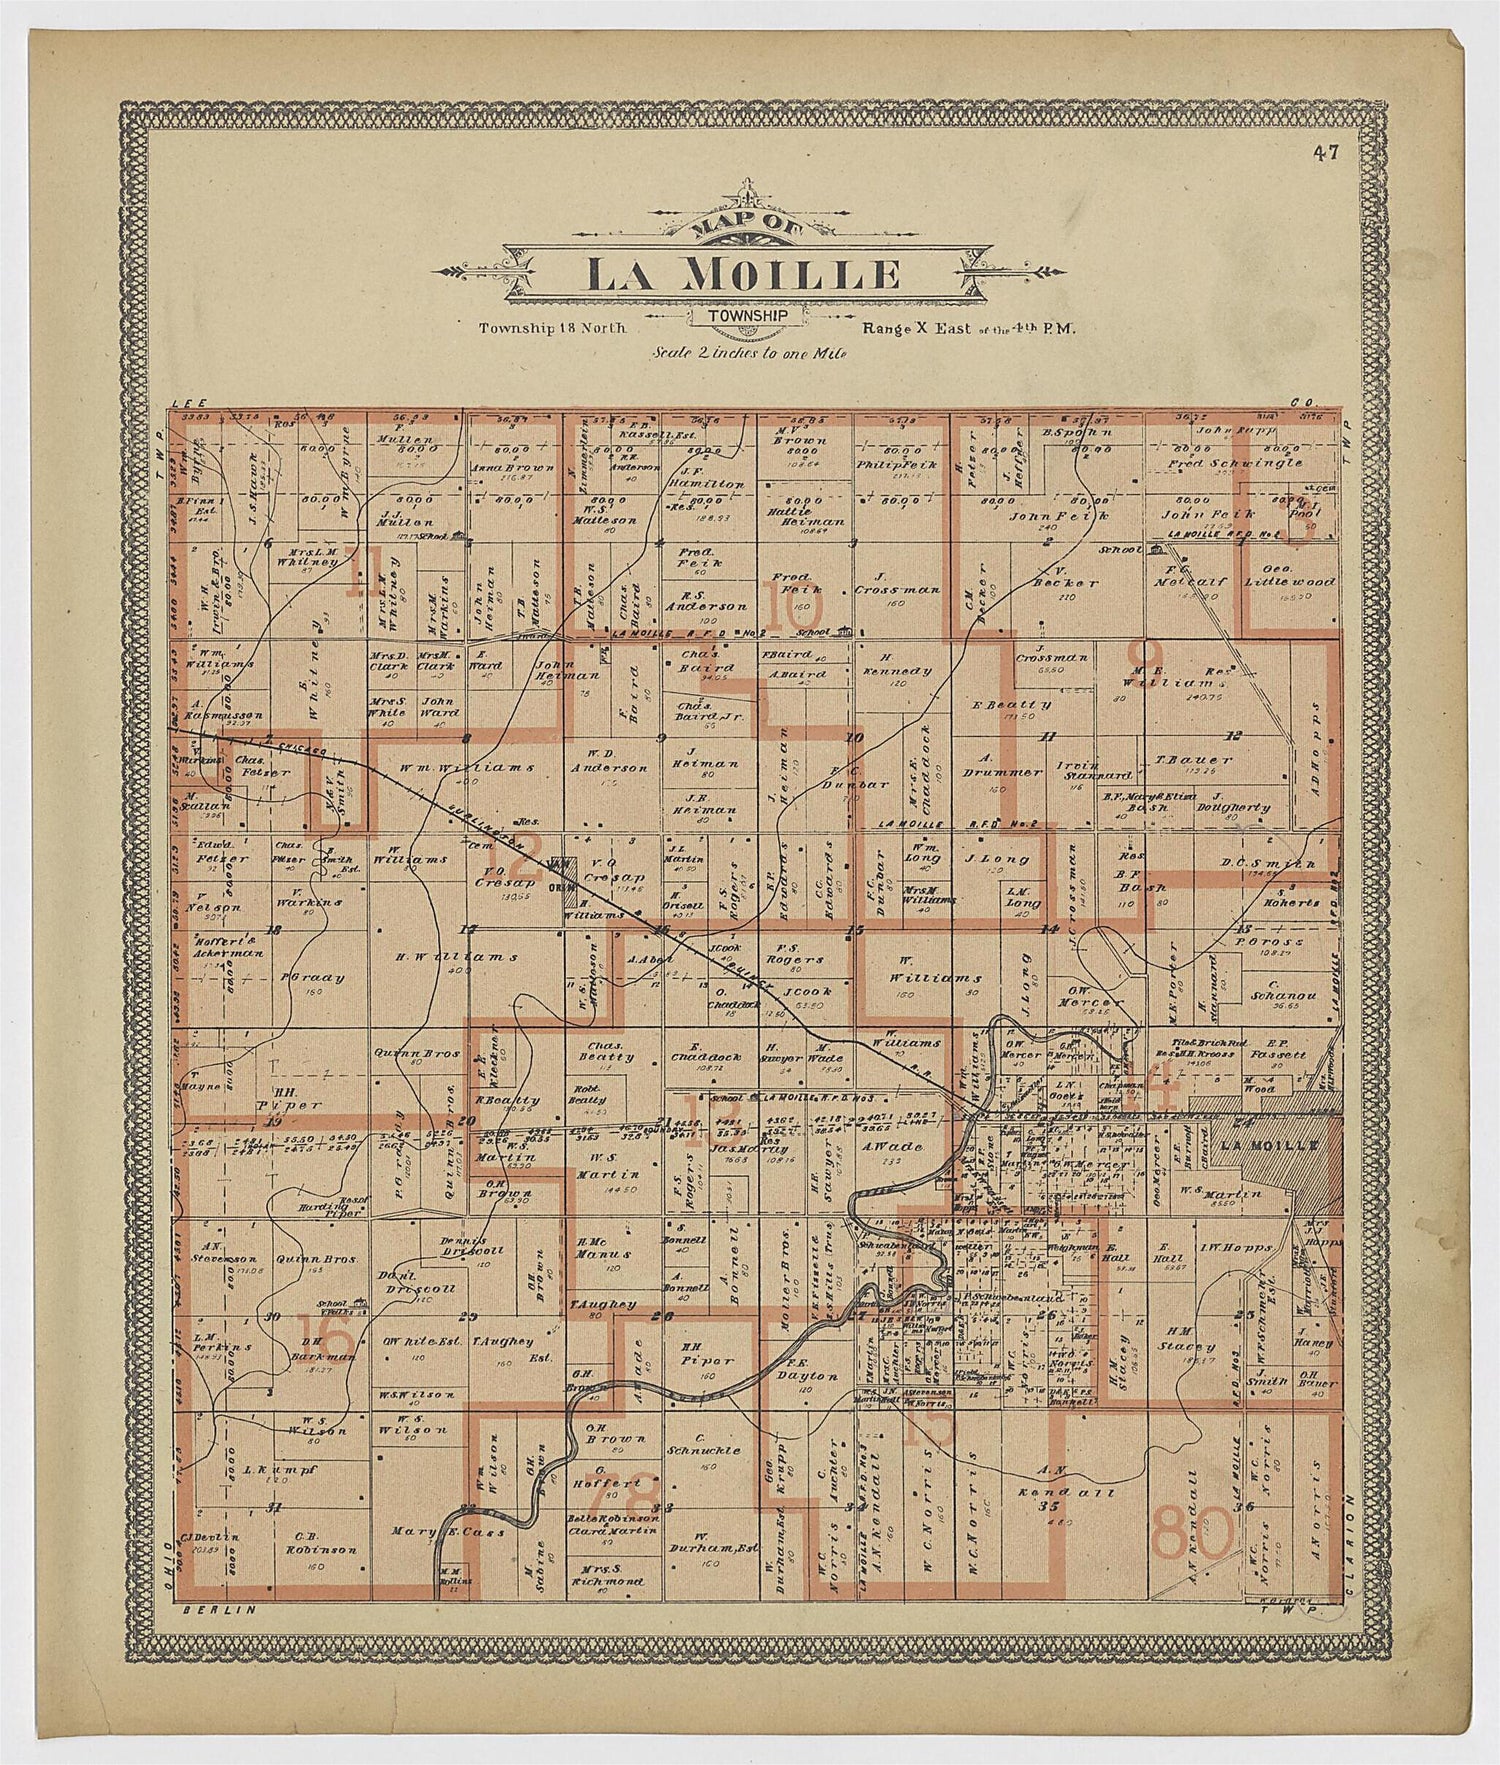 This old map of Image 27 of 20th Century Atlas of Bureau County, Illinois from Atlas of Bureau County, Illinois from 1905 was created by  Middle-West Publishing Co in 1905